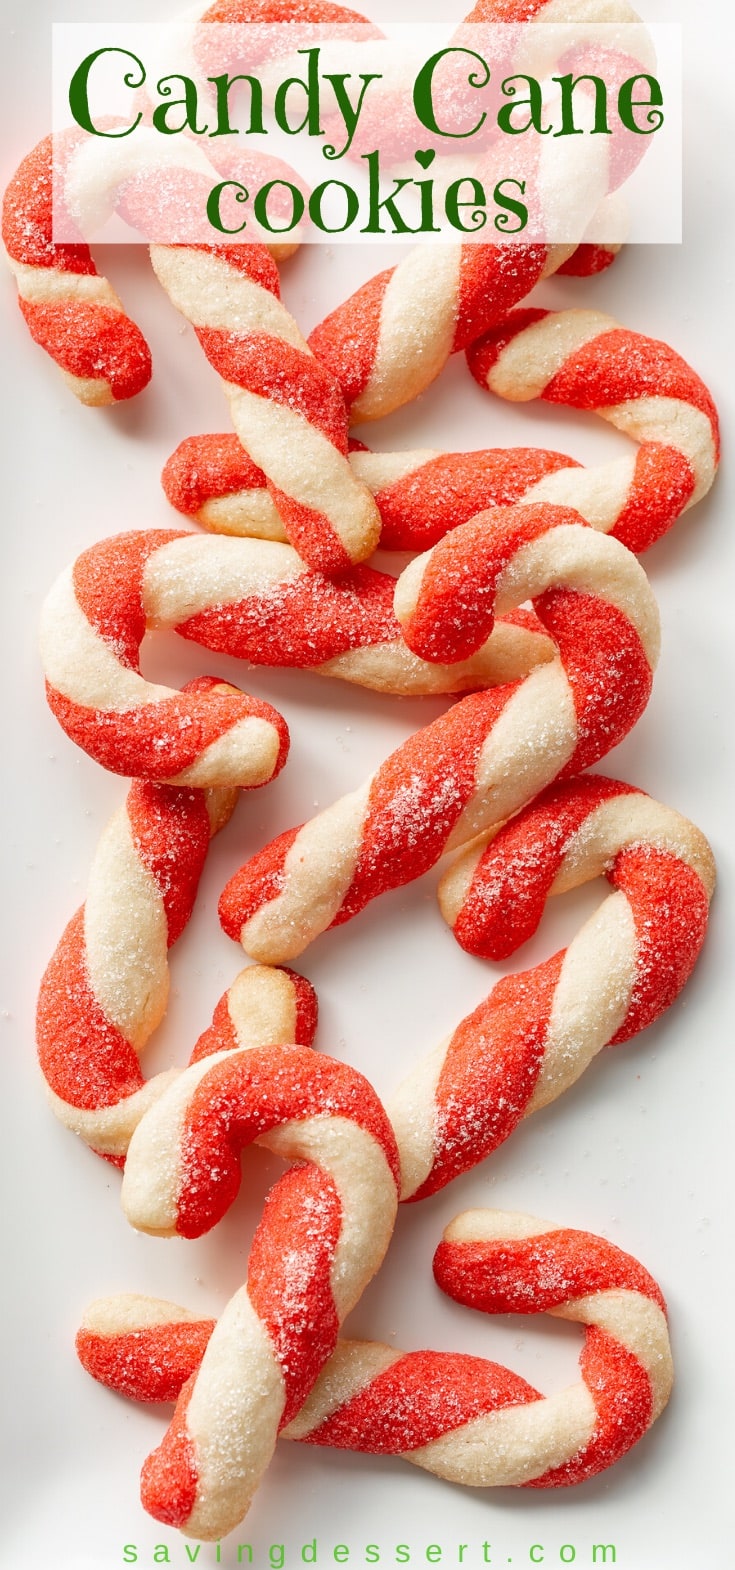 A platter of candy cane cookies